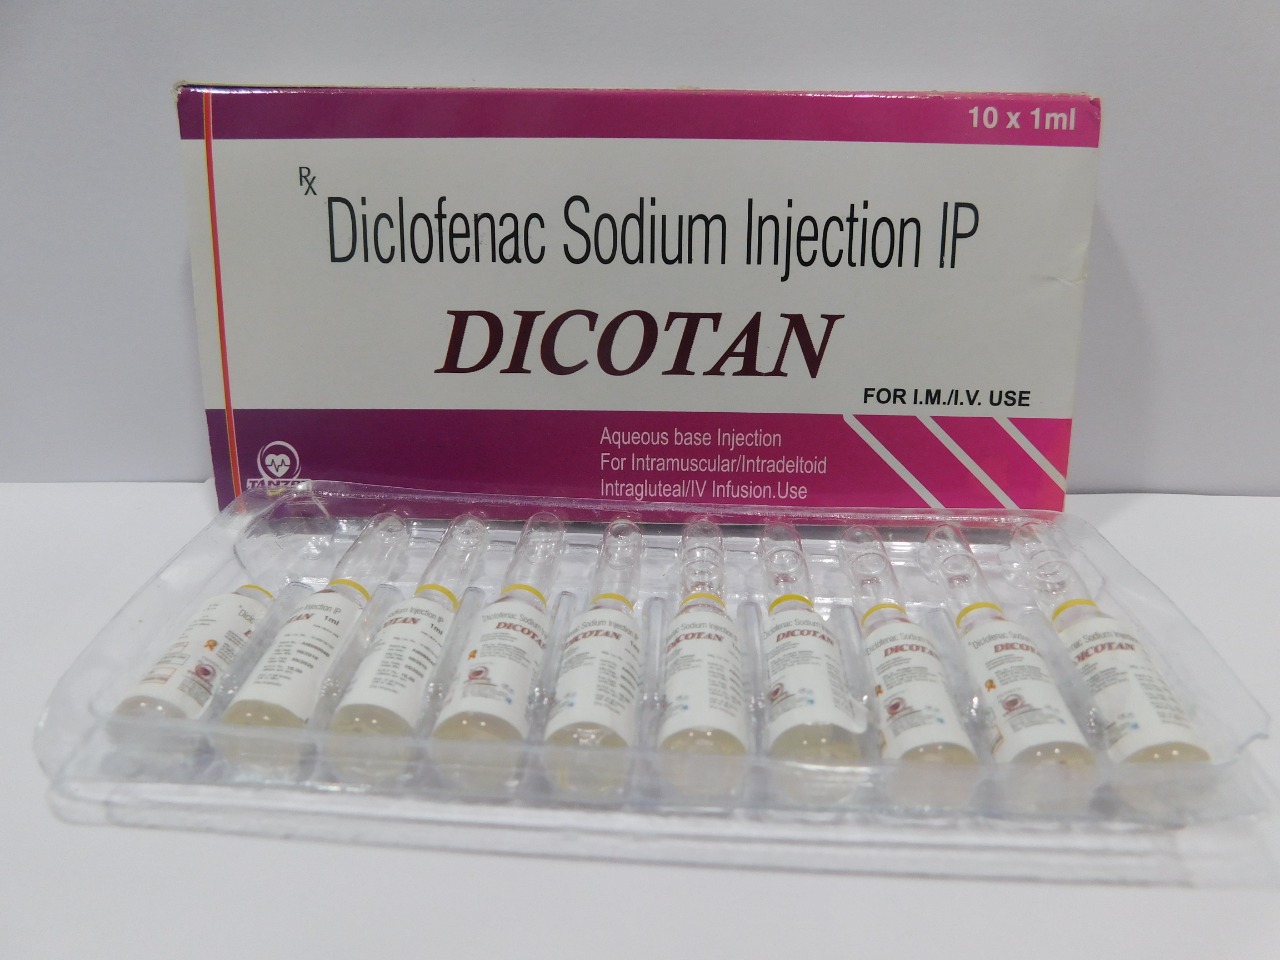 Product Name: Dicotan, Compositions of Dicotan are Diclofenac Sodium injection IP - Tanzer Lifecare Private Limited